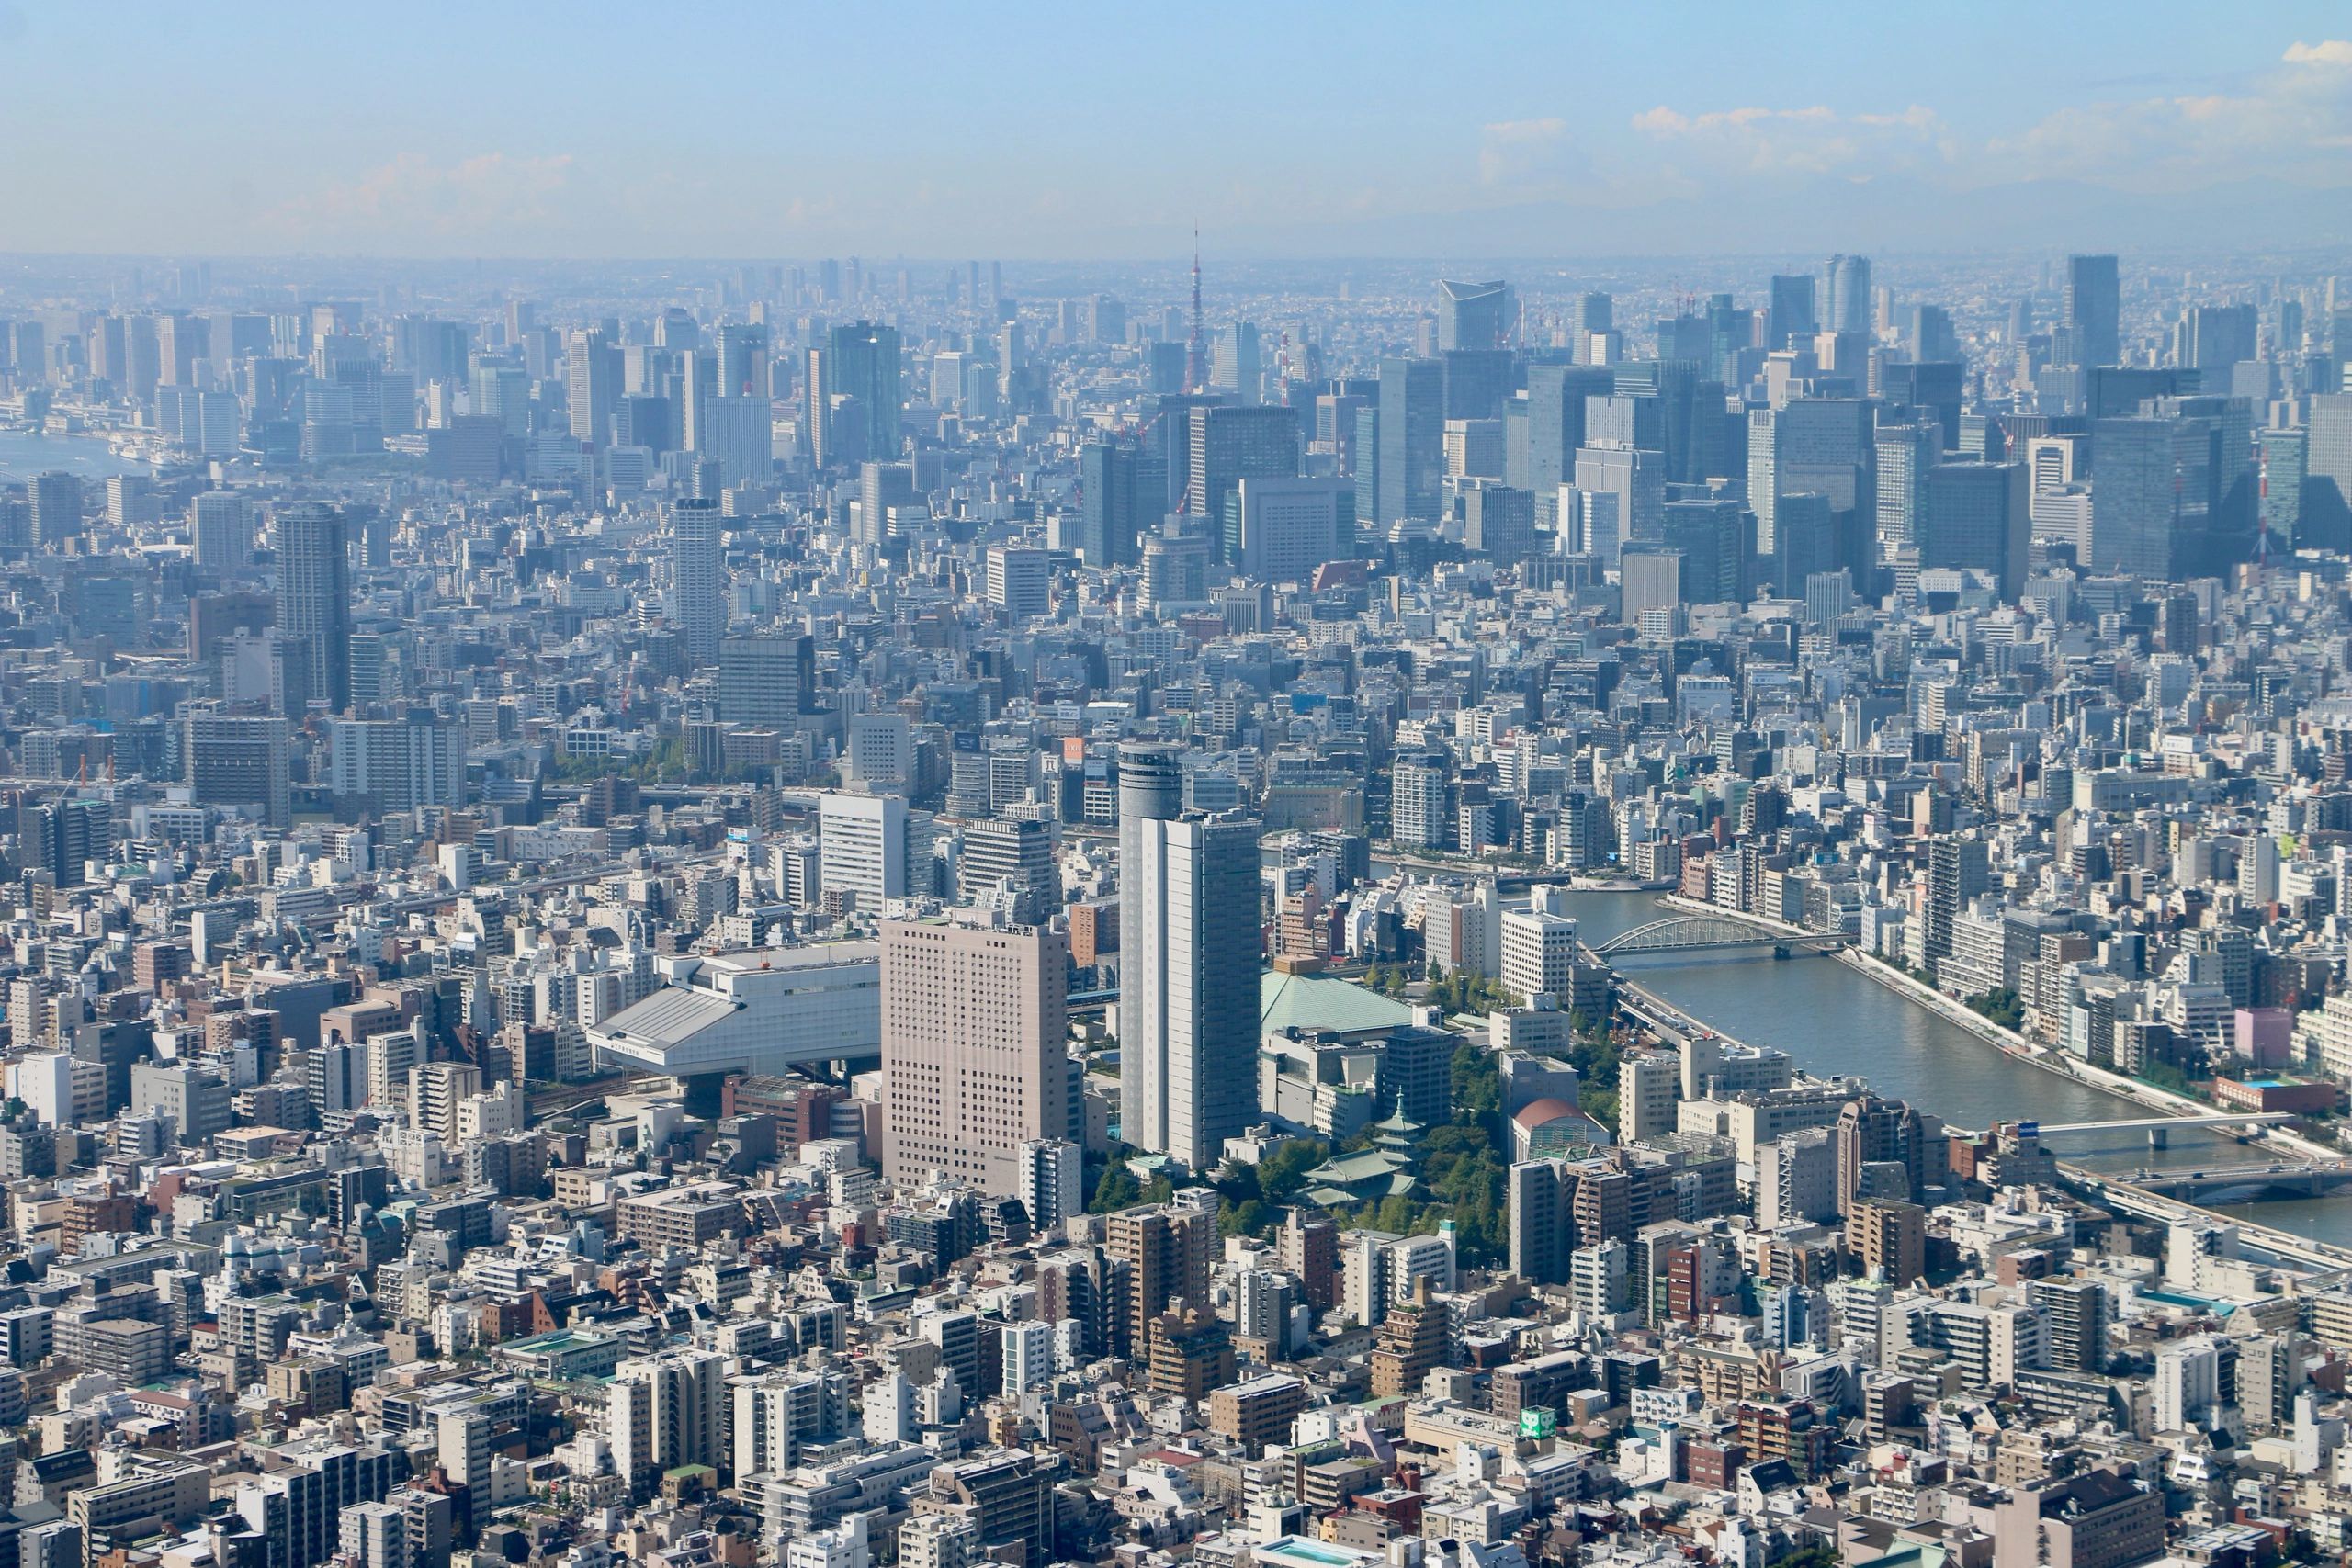 Tokyo as seen from the viewing platform of the Tokyo Skytree